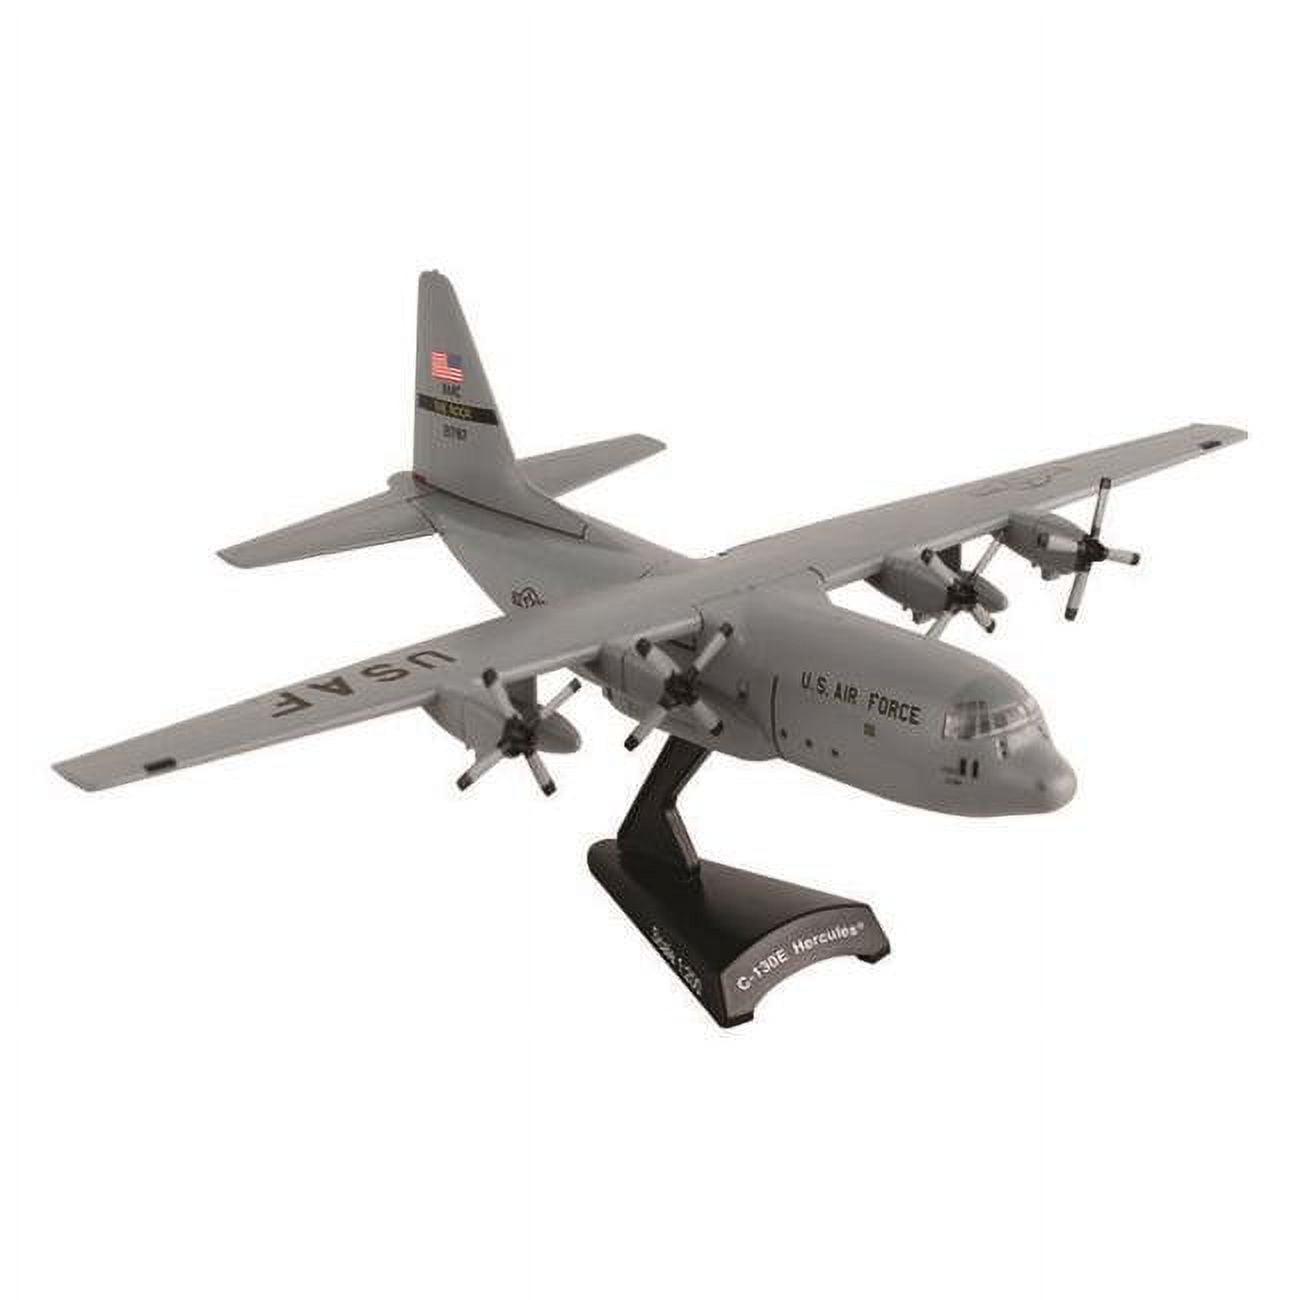 Ps5330-3 1 Isto 200 Usaf C-130 Spare 617 Model Airplane